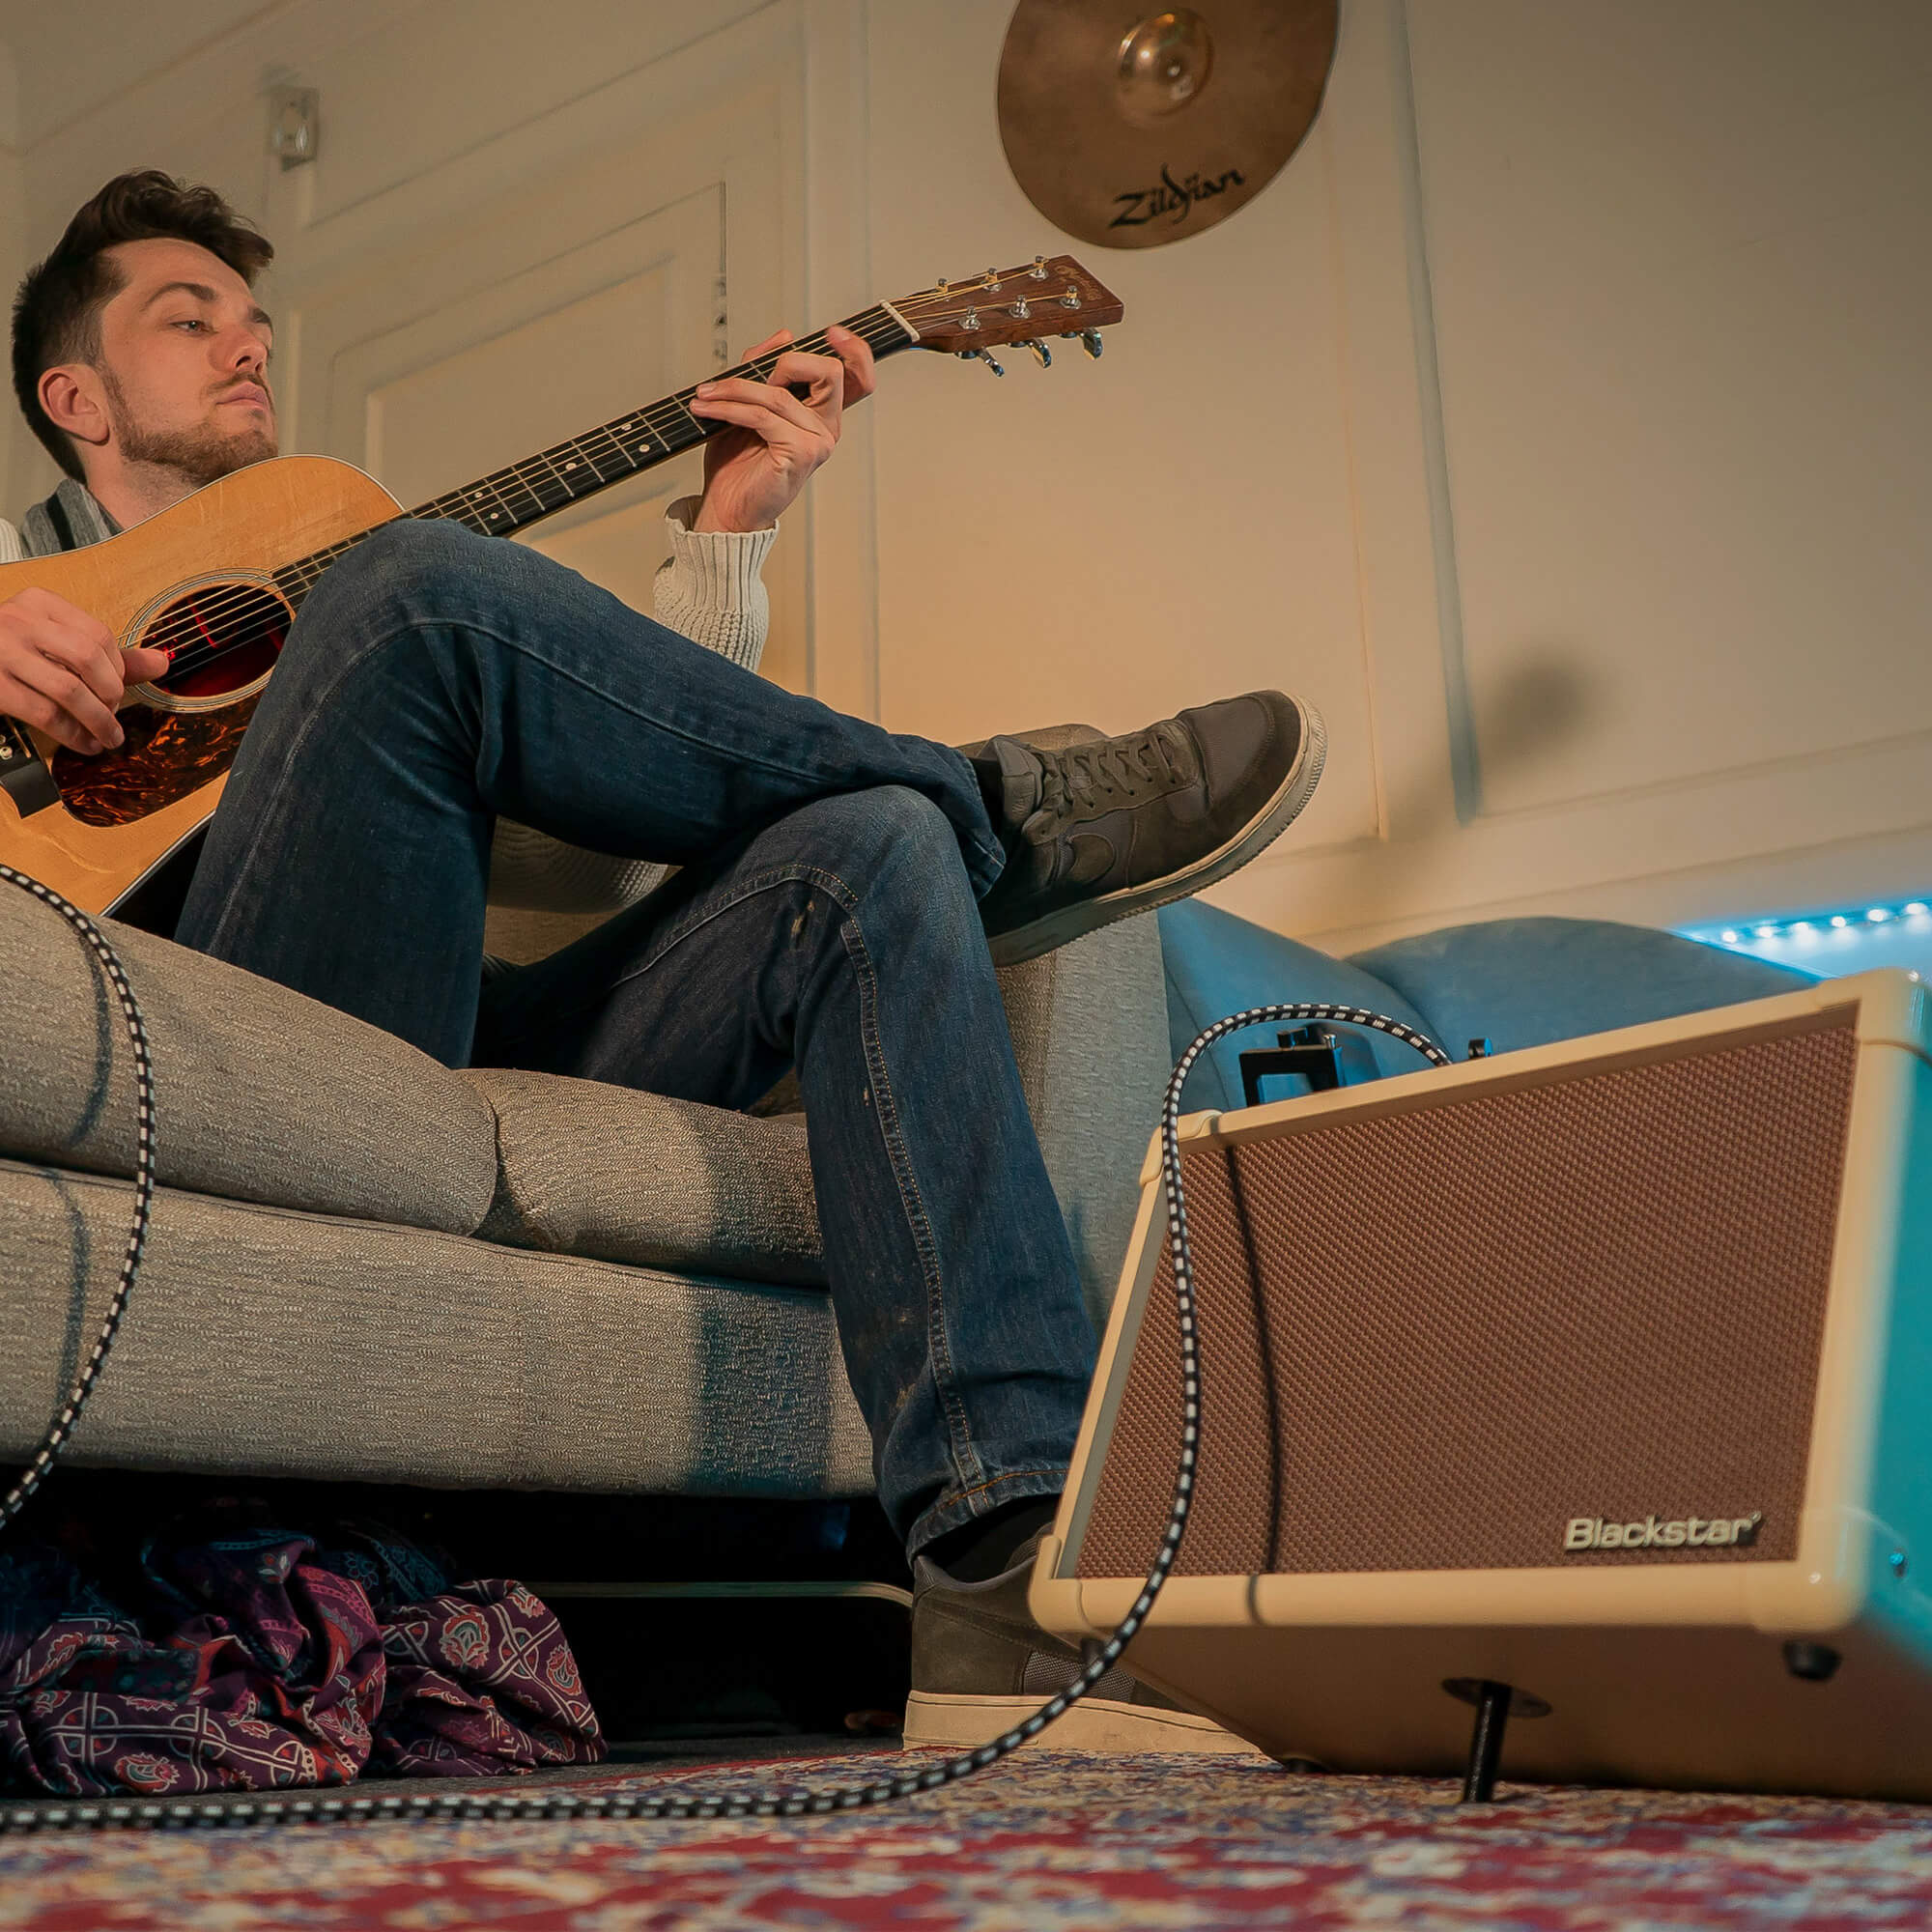 musician playing acoustic guitar plugged into Blackstar Acoustic:CORE 30 guitar amplifier